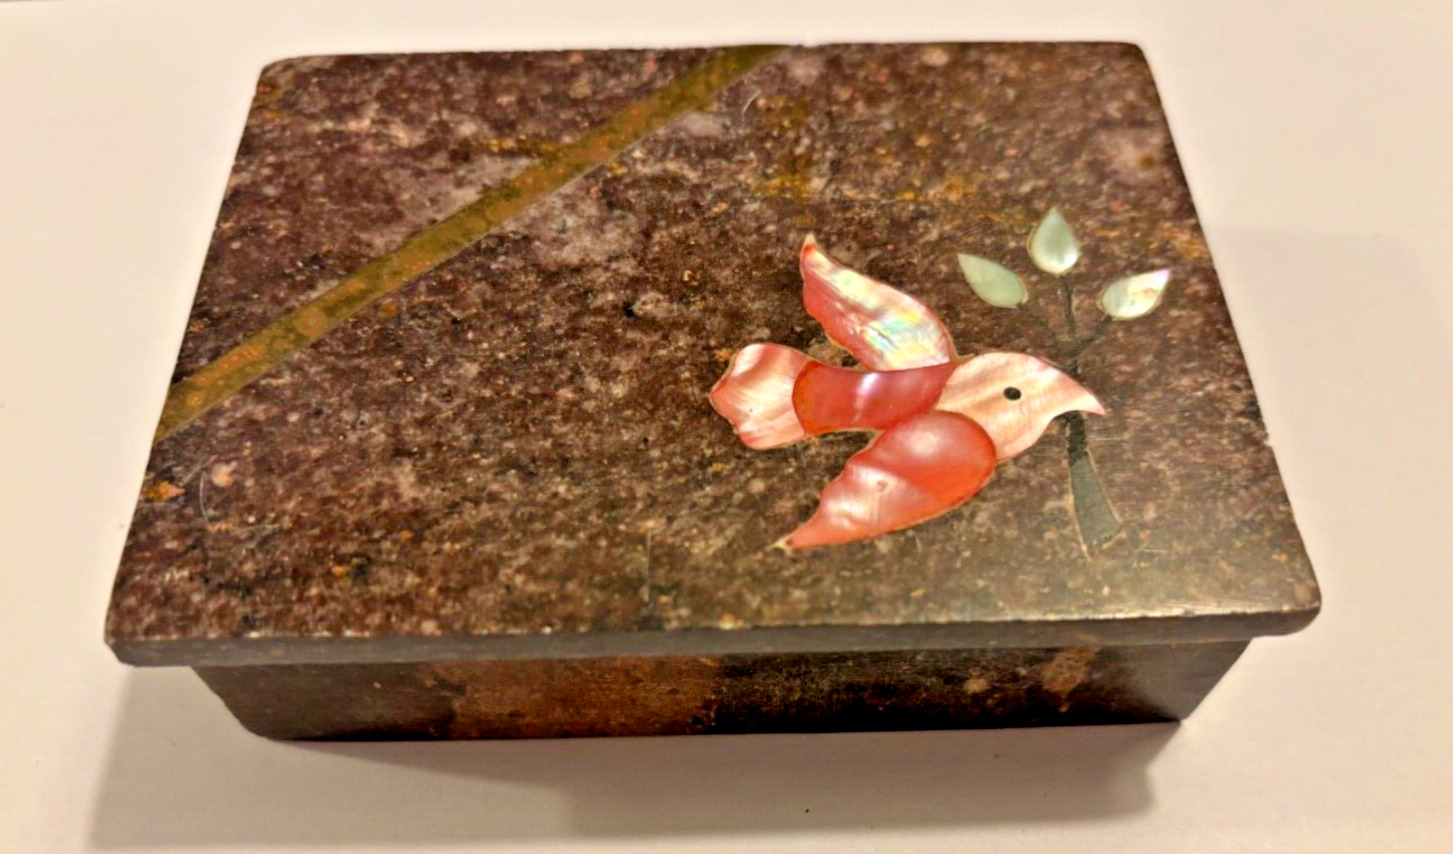 VTG 1970'S ROBERt N Smith, Inlayed Pink Dove (peace) with flowers in Trinket Box